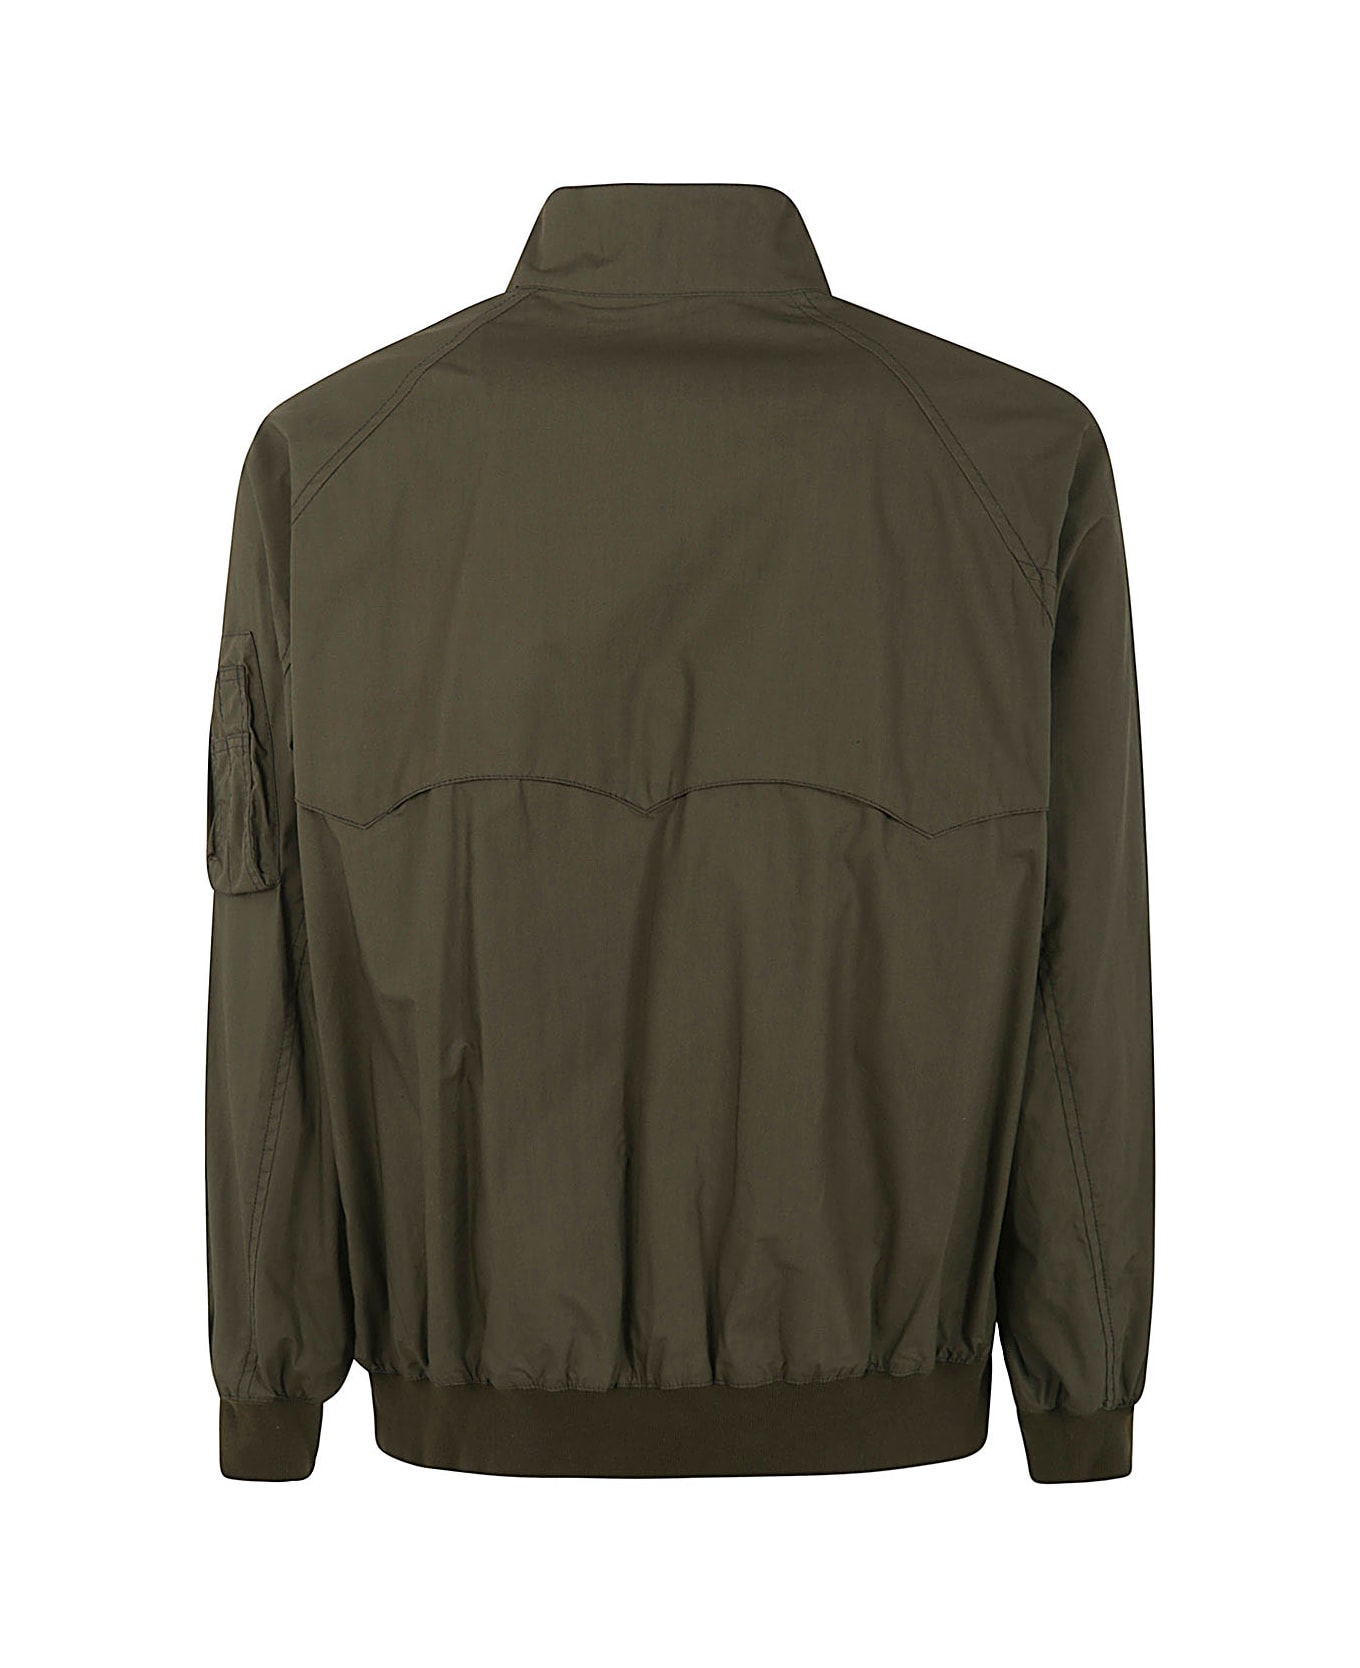 Comme des Garçons Homme Washed Cotton Bomber With Side Zip - Khaki X Navy